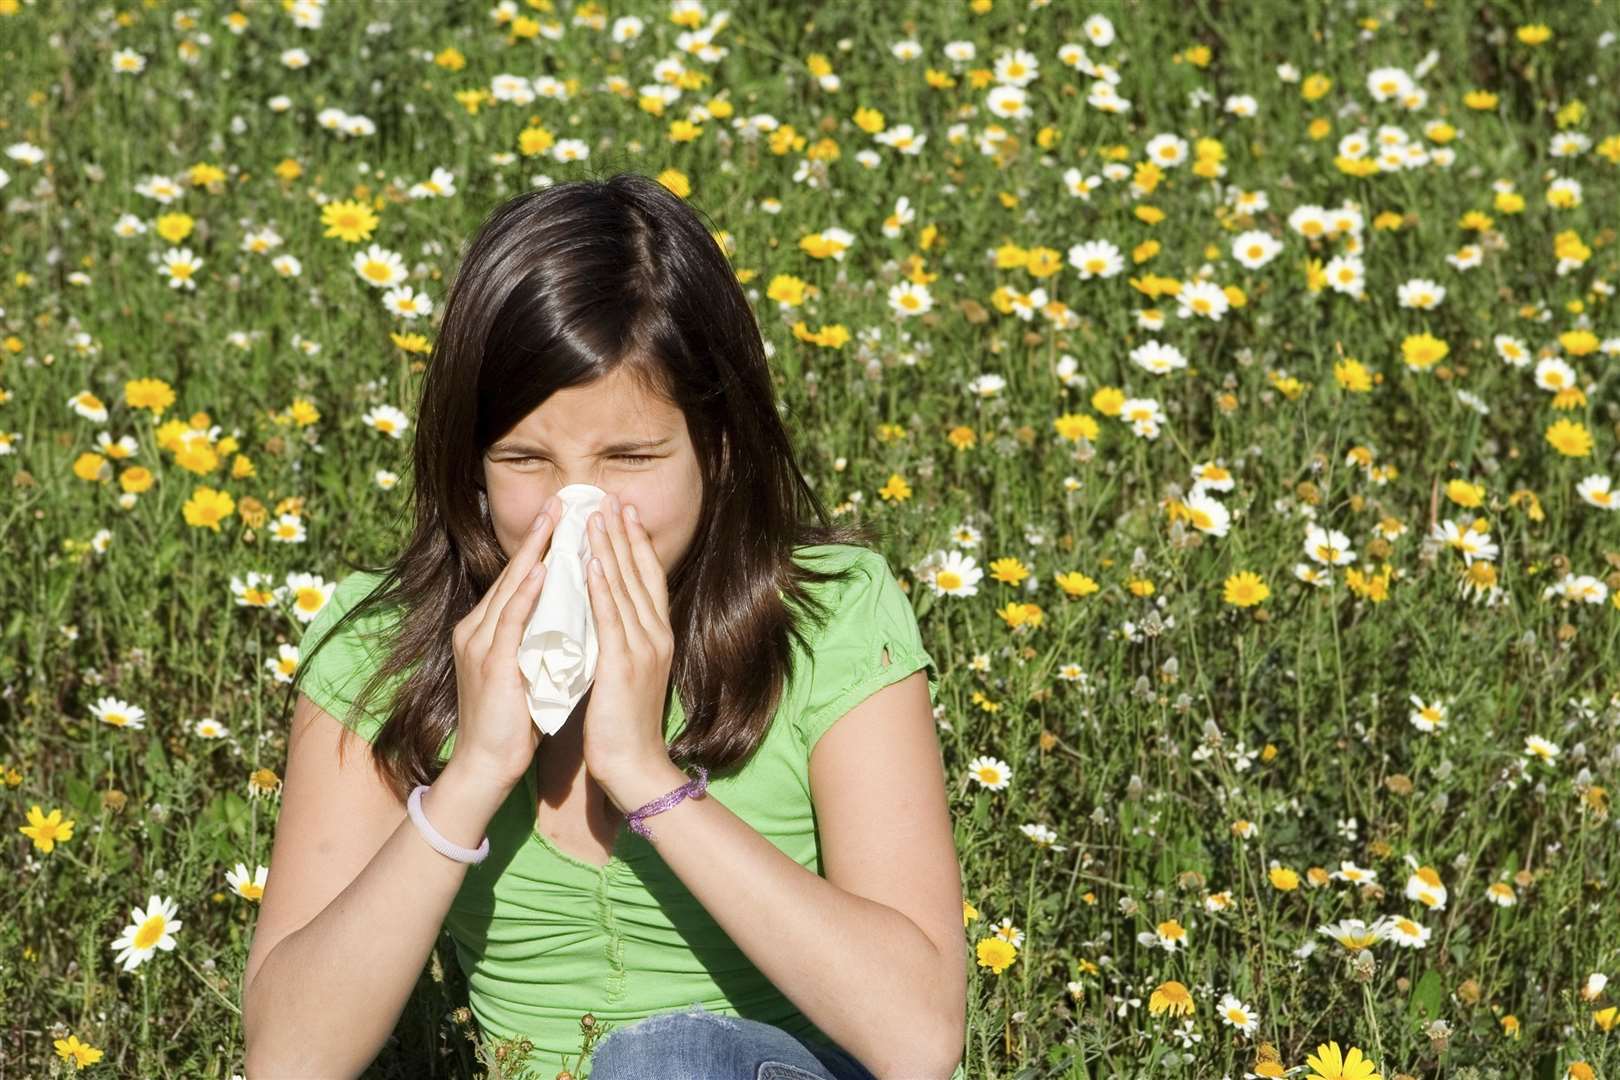 There are reports in both the UK and Europe that tree pollen counts may be rising earlier than usual. Image: Stock photo.